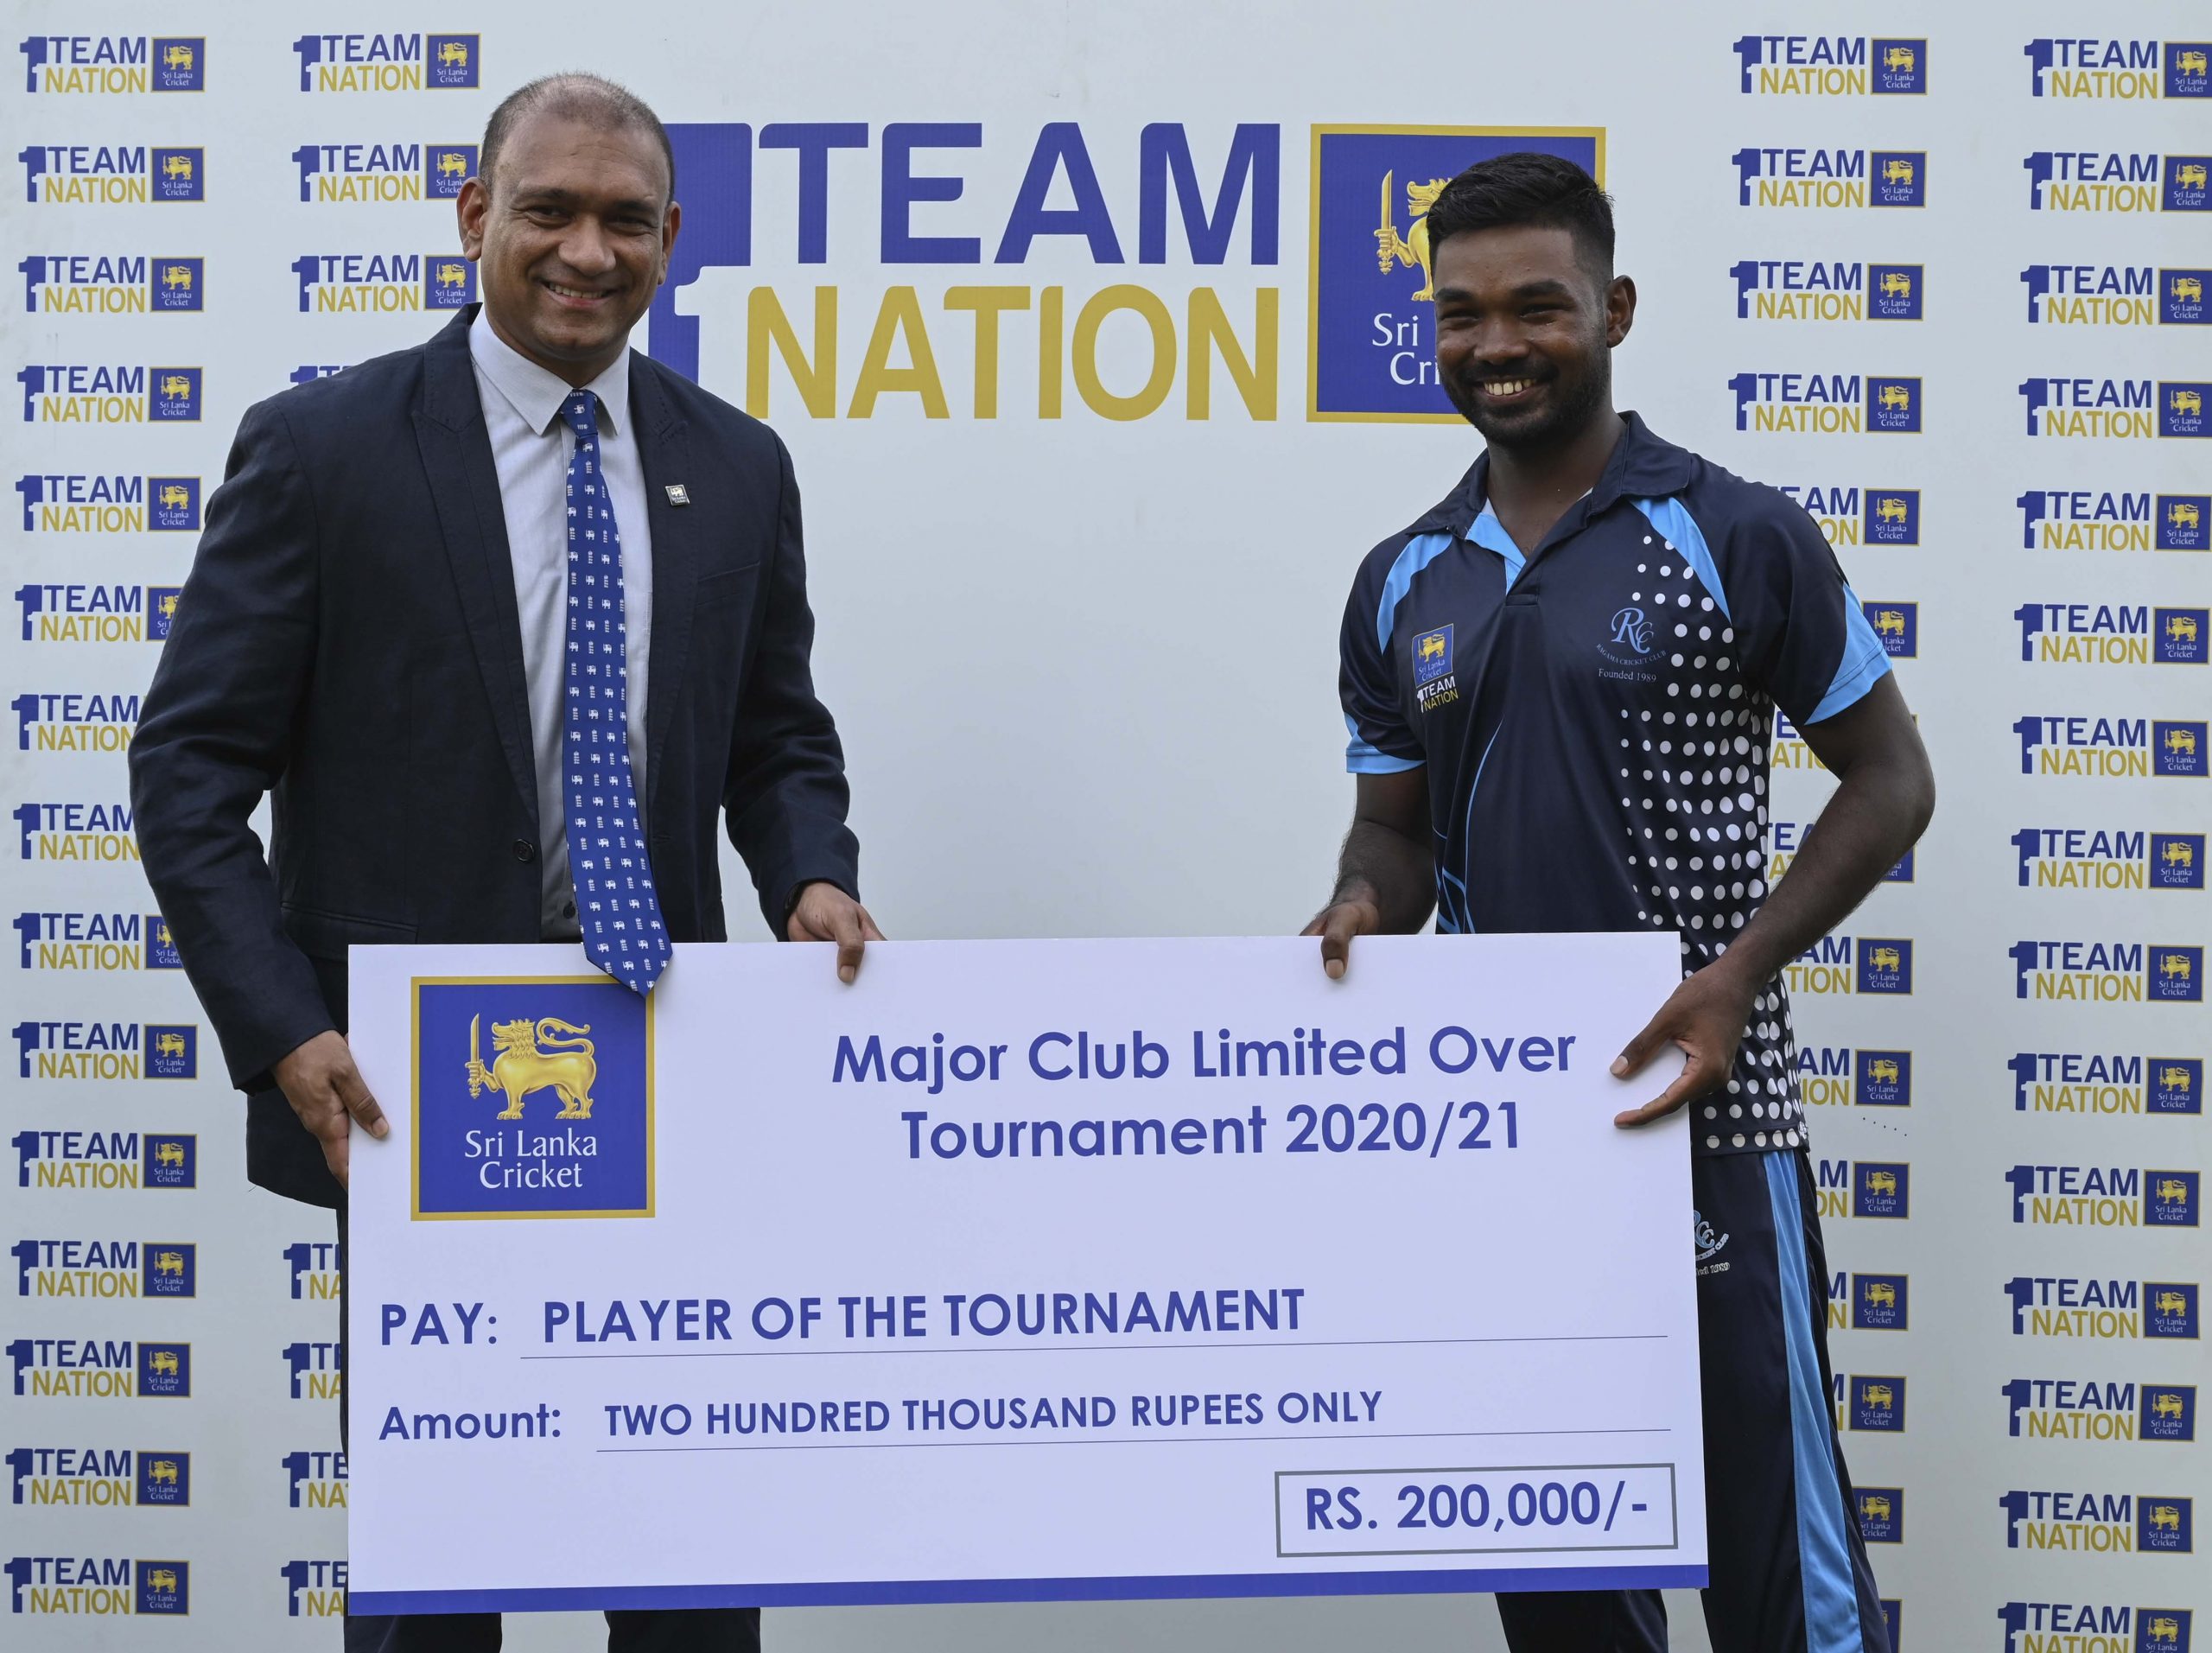 ‘Sheer hard work at the nets my success story’ | Janith Liyanage, Player of the Tournament says